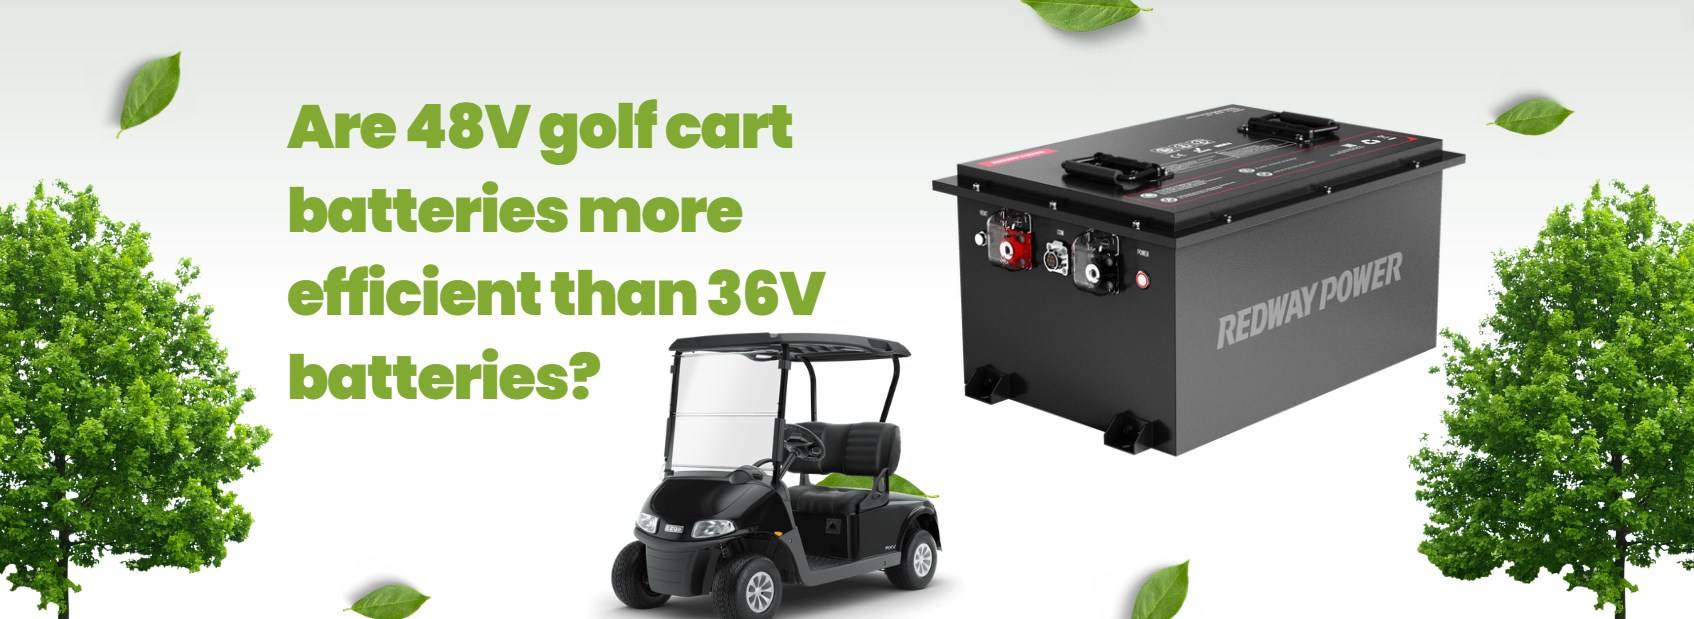 Are 48V golf cart batteries more efficient than 36V batteries? 48v 100ah lithium golf cart battery redway